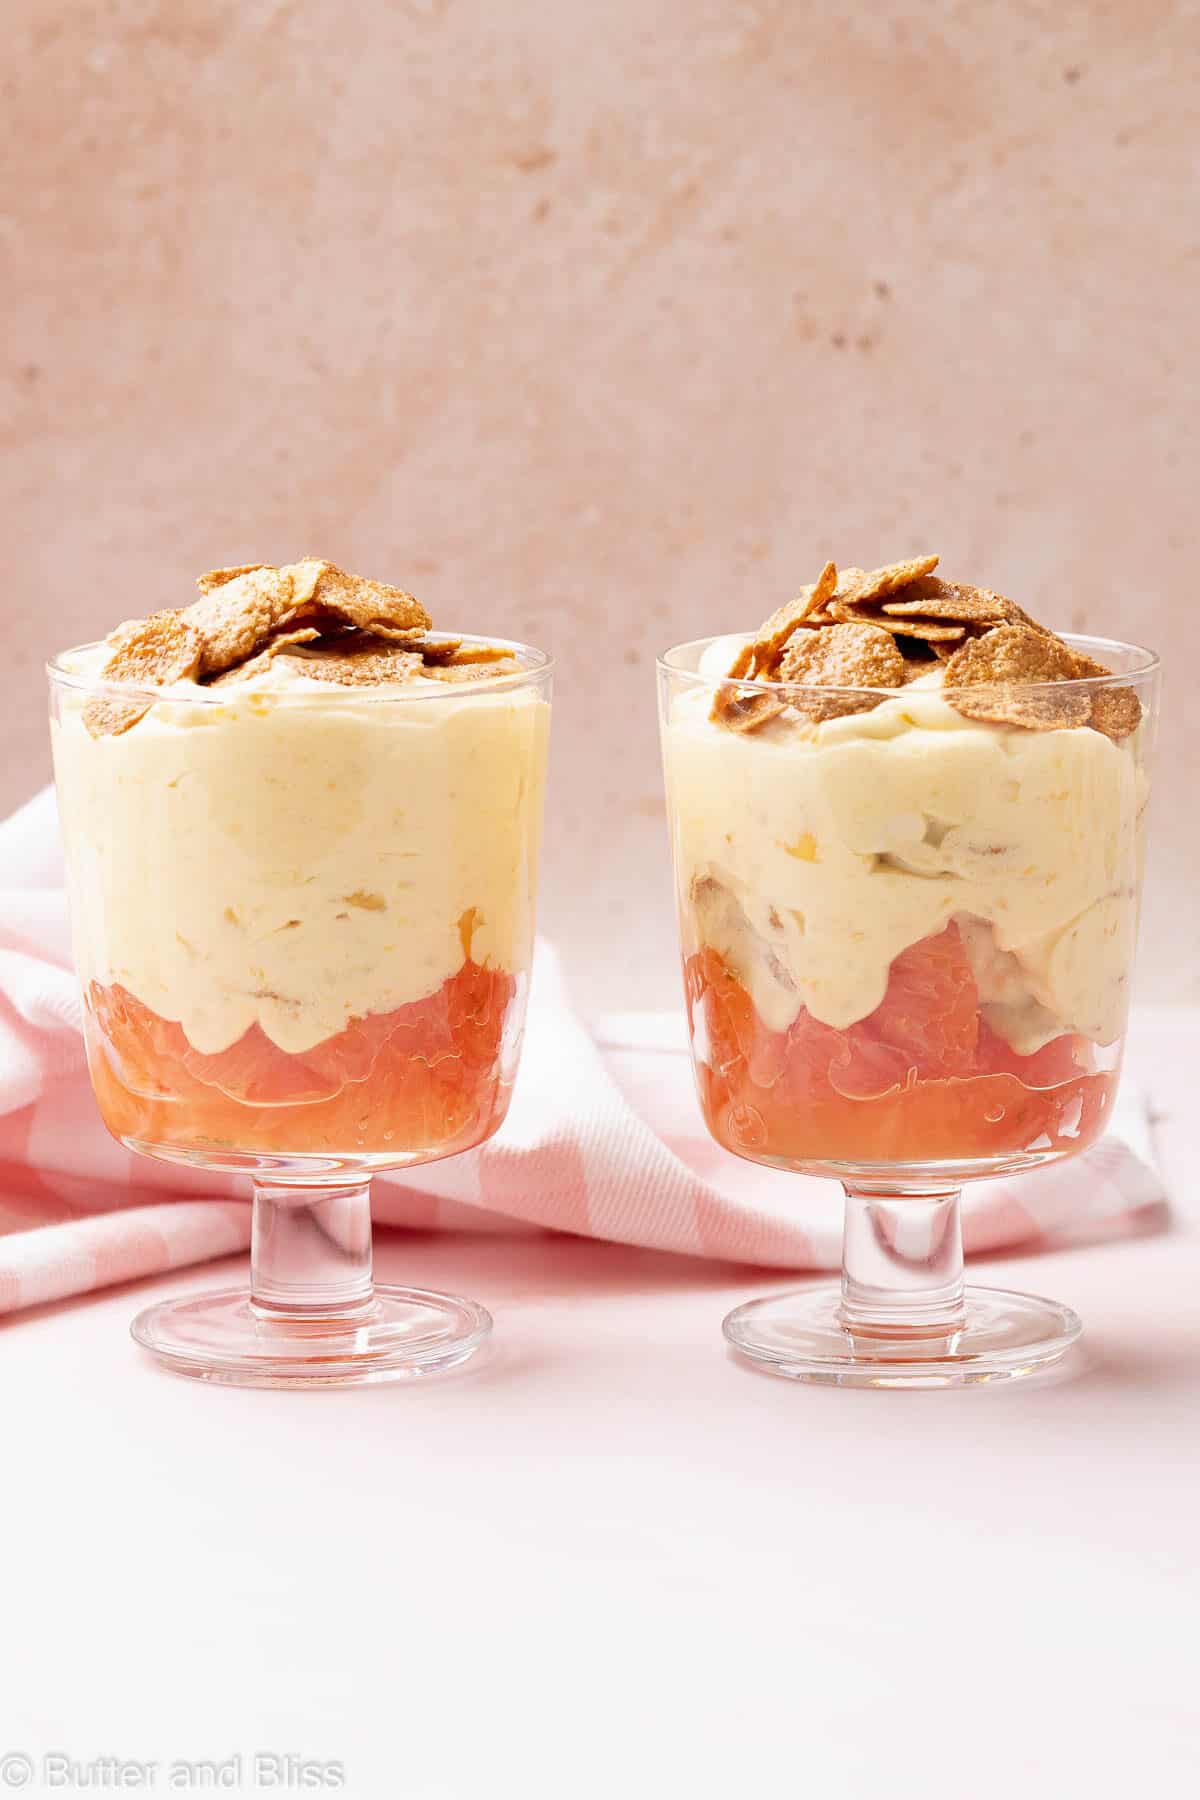 Two parfait glasses filled with mango grapefruit dessert lined up on a table